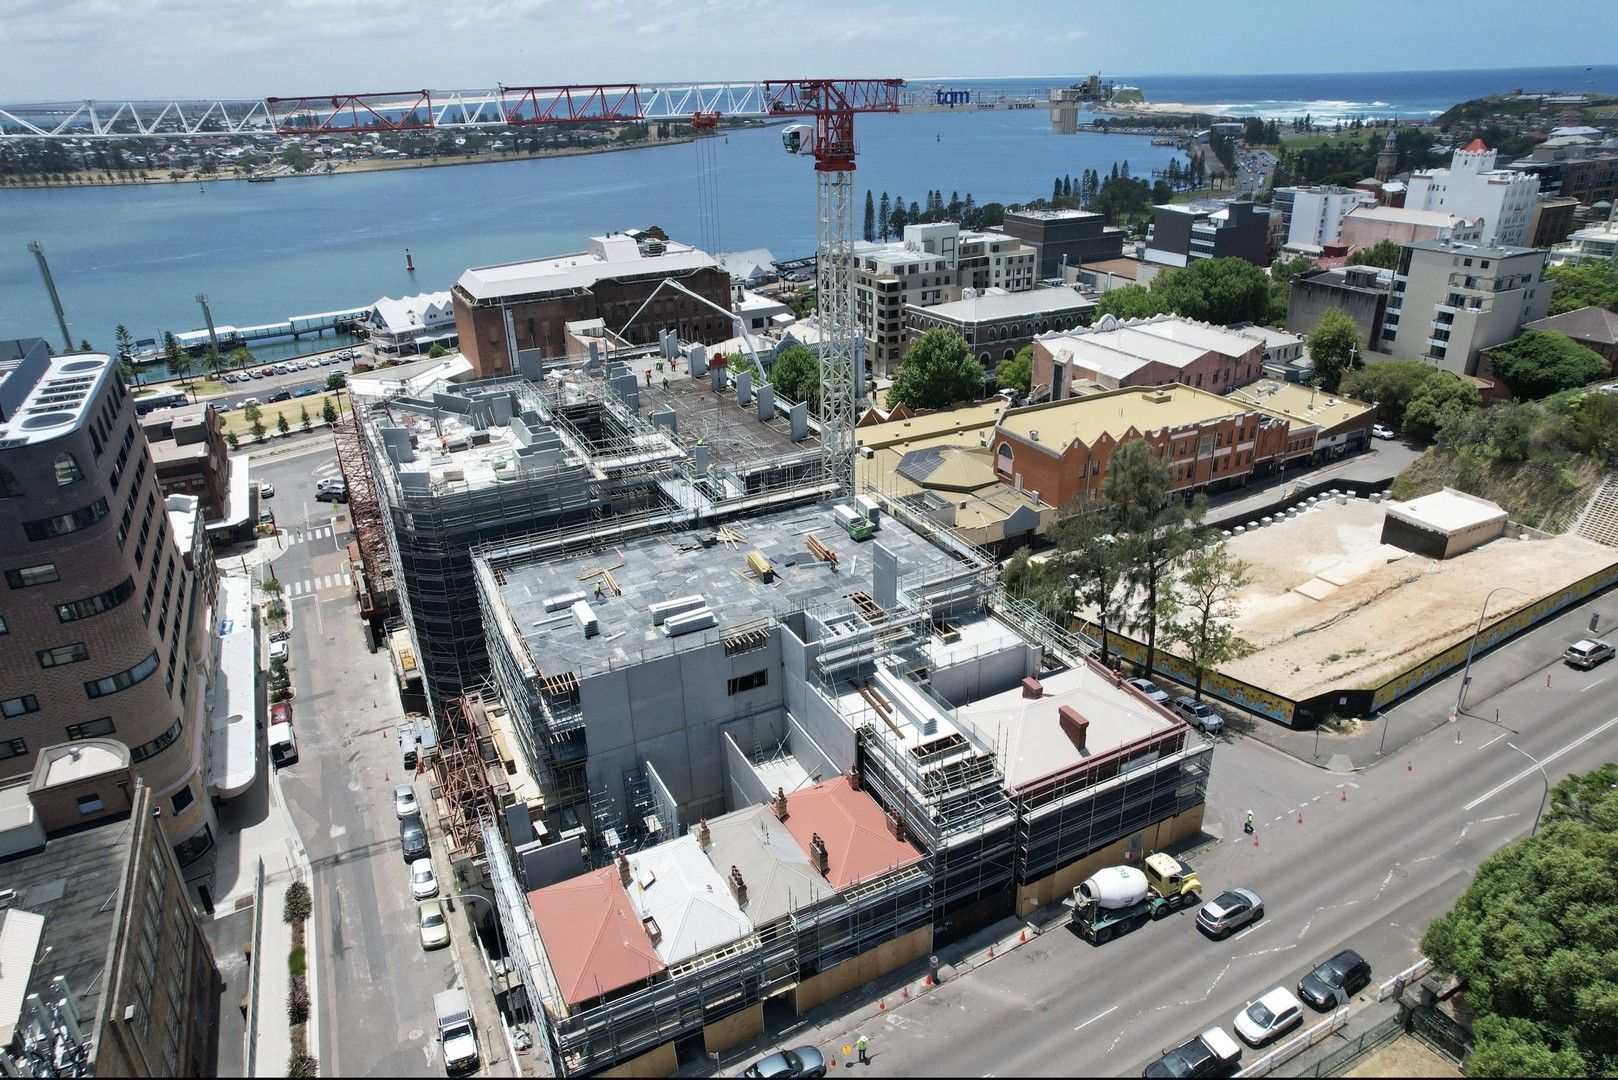 An aerial view showcases an urban construction site amidst a backdrop of diverse architectural structures. Dominating the frame's center is a building under construction, wrapped in scaffolding, with workers busy on its levels. Construction materials and equipment are scattered across the site, and a tall white crane towers above, casting its shadow below. Adjacent to the site are a mix of older brick buildings, modern apartments, and commercial establishments. On the left, a glimpse of a bright red bridge stands out against the blue water of a vast river or bay. Farther in the distance, a coastal line with trees and a beach area can be spotted.